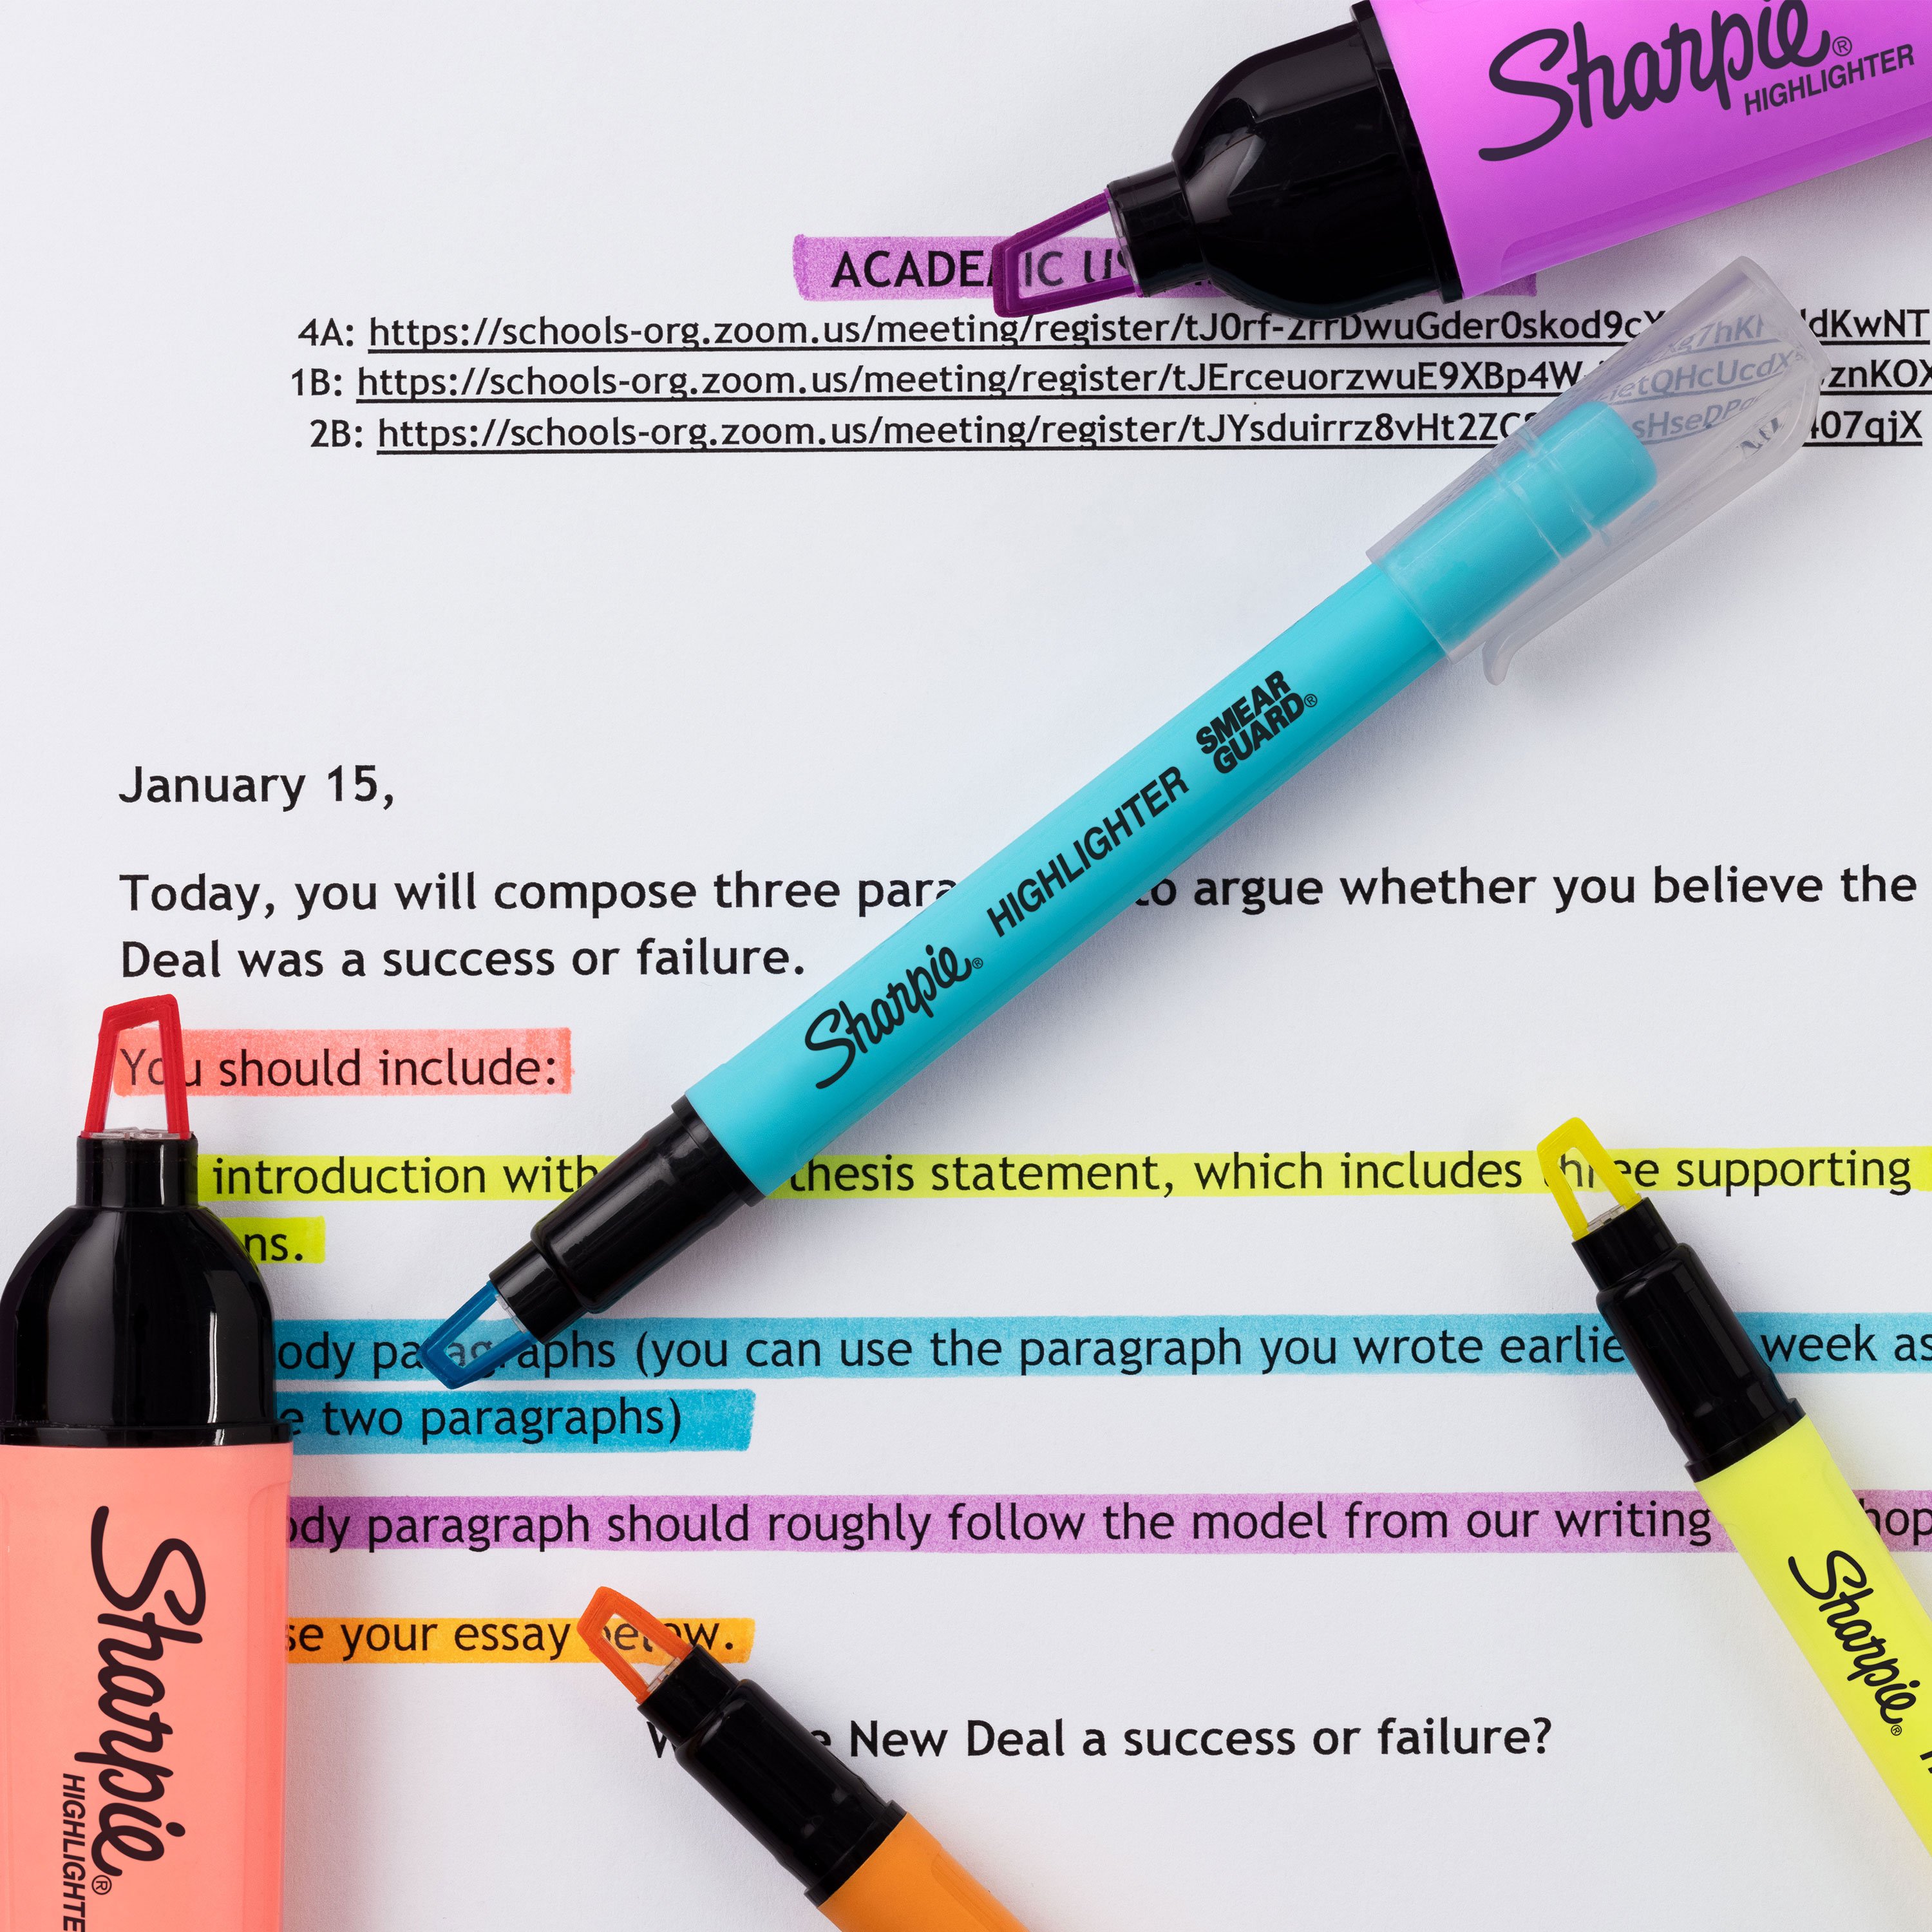 Sharpie Clear View Highlighters Sets